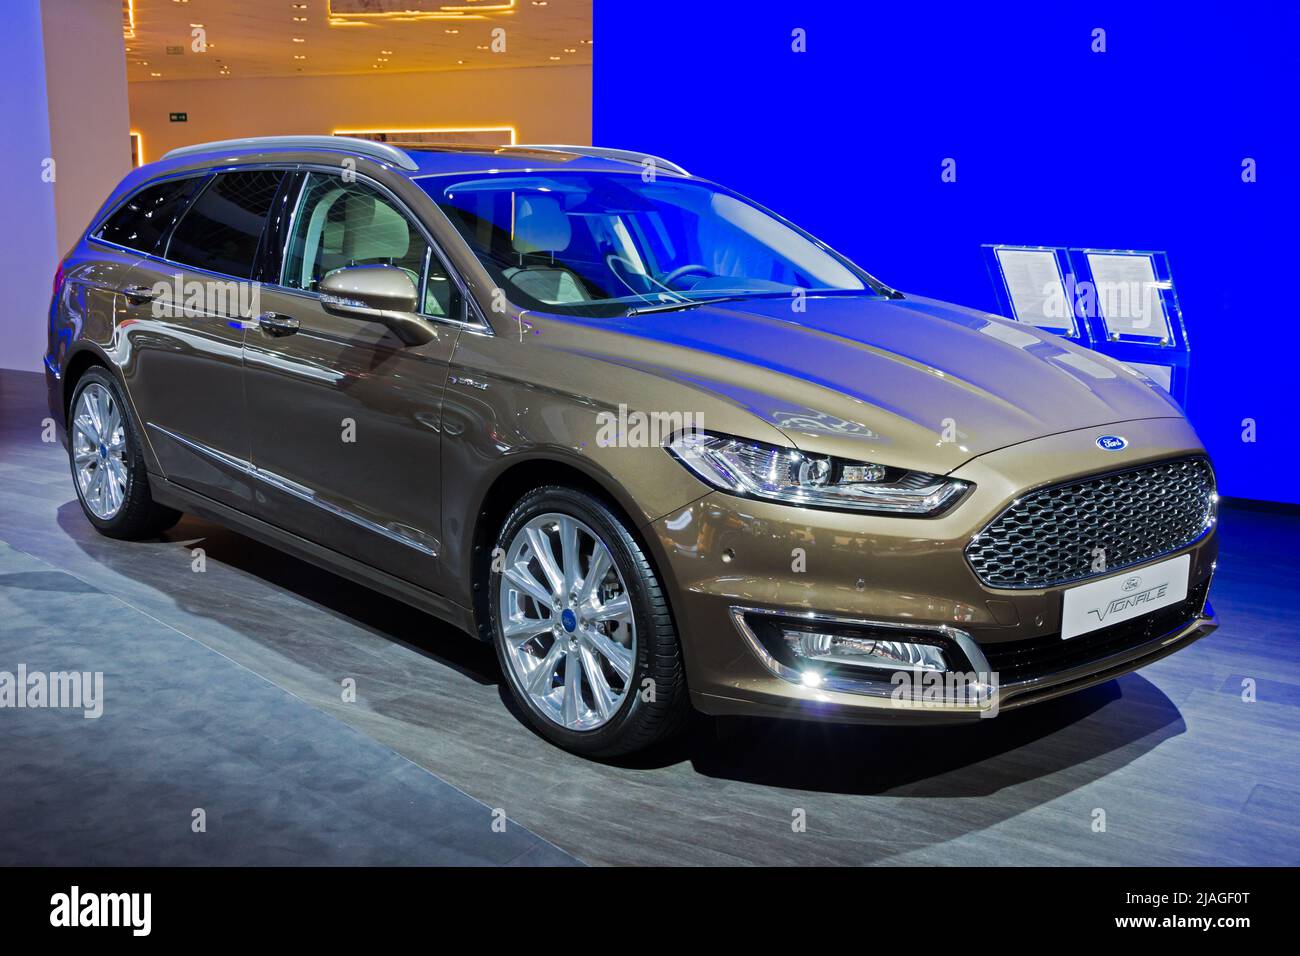 Ford Mondeo Vignale car at the Brussels Expo Autosalon motor show. Brussels - January 12, 2016. Stock Photo